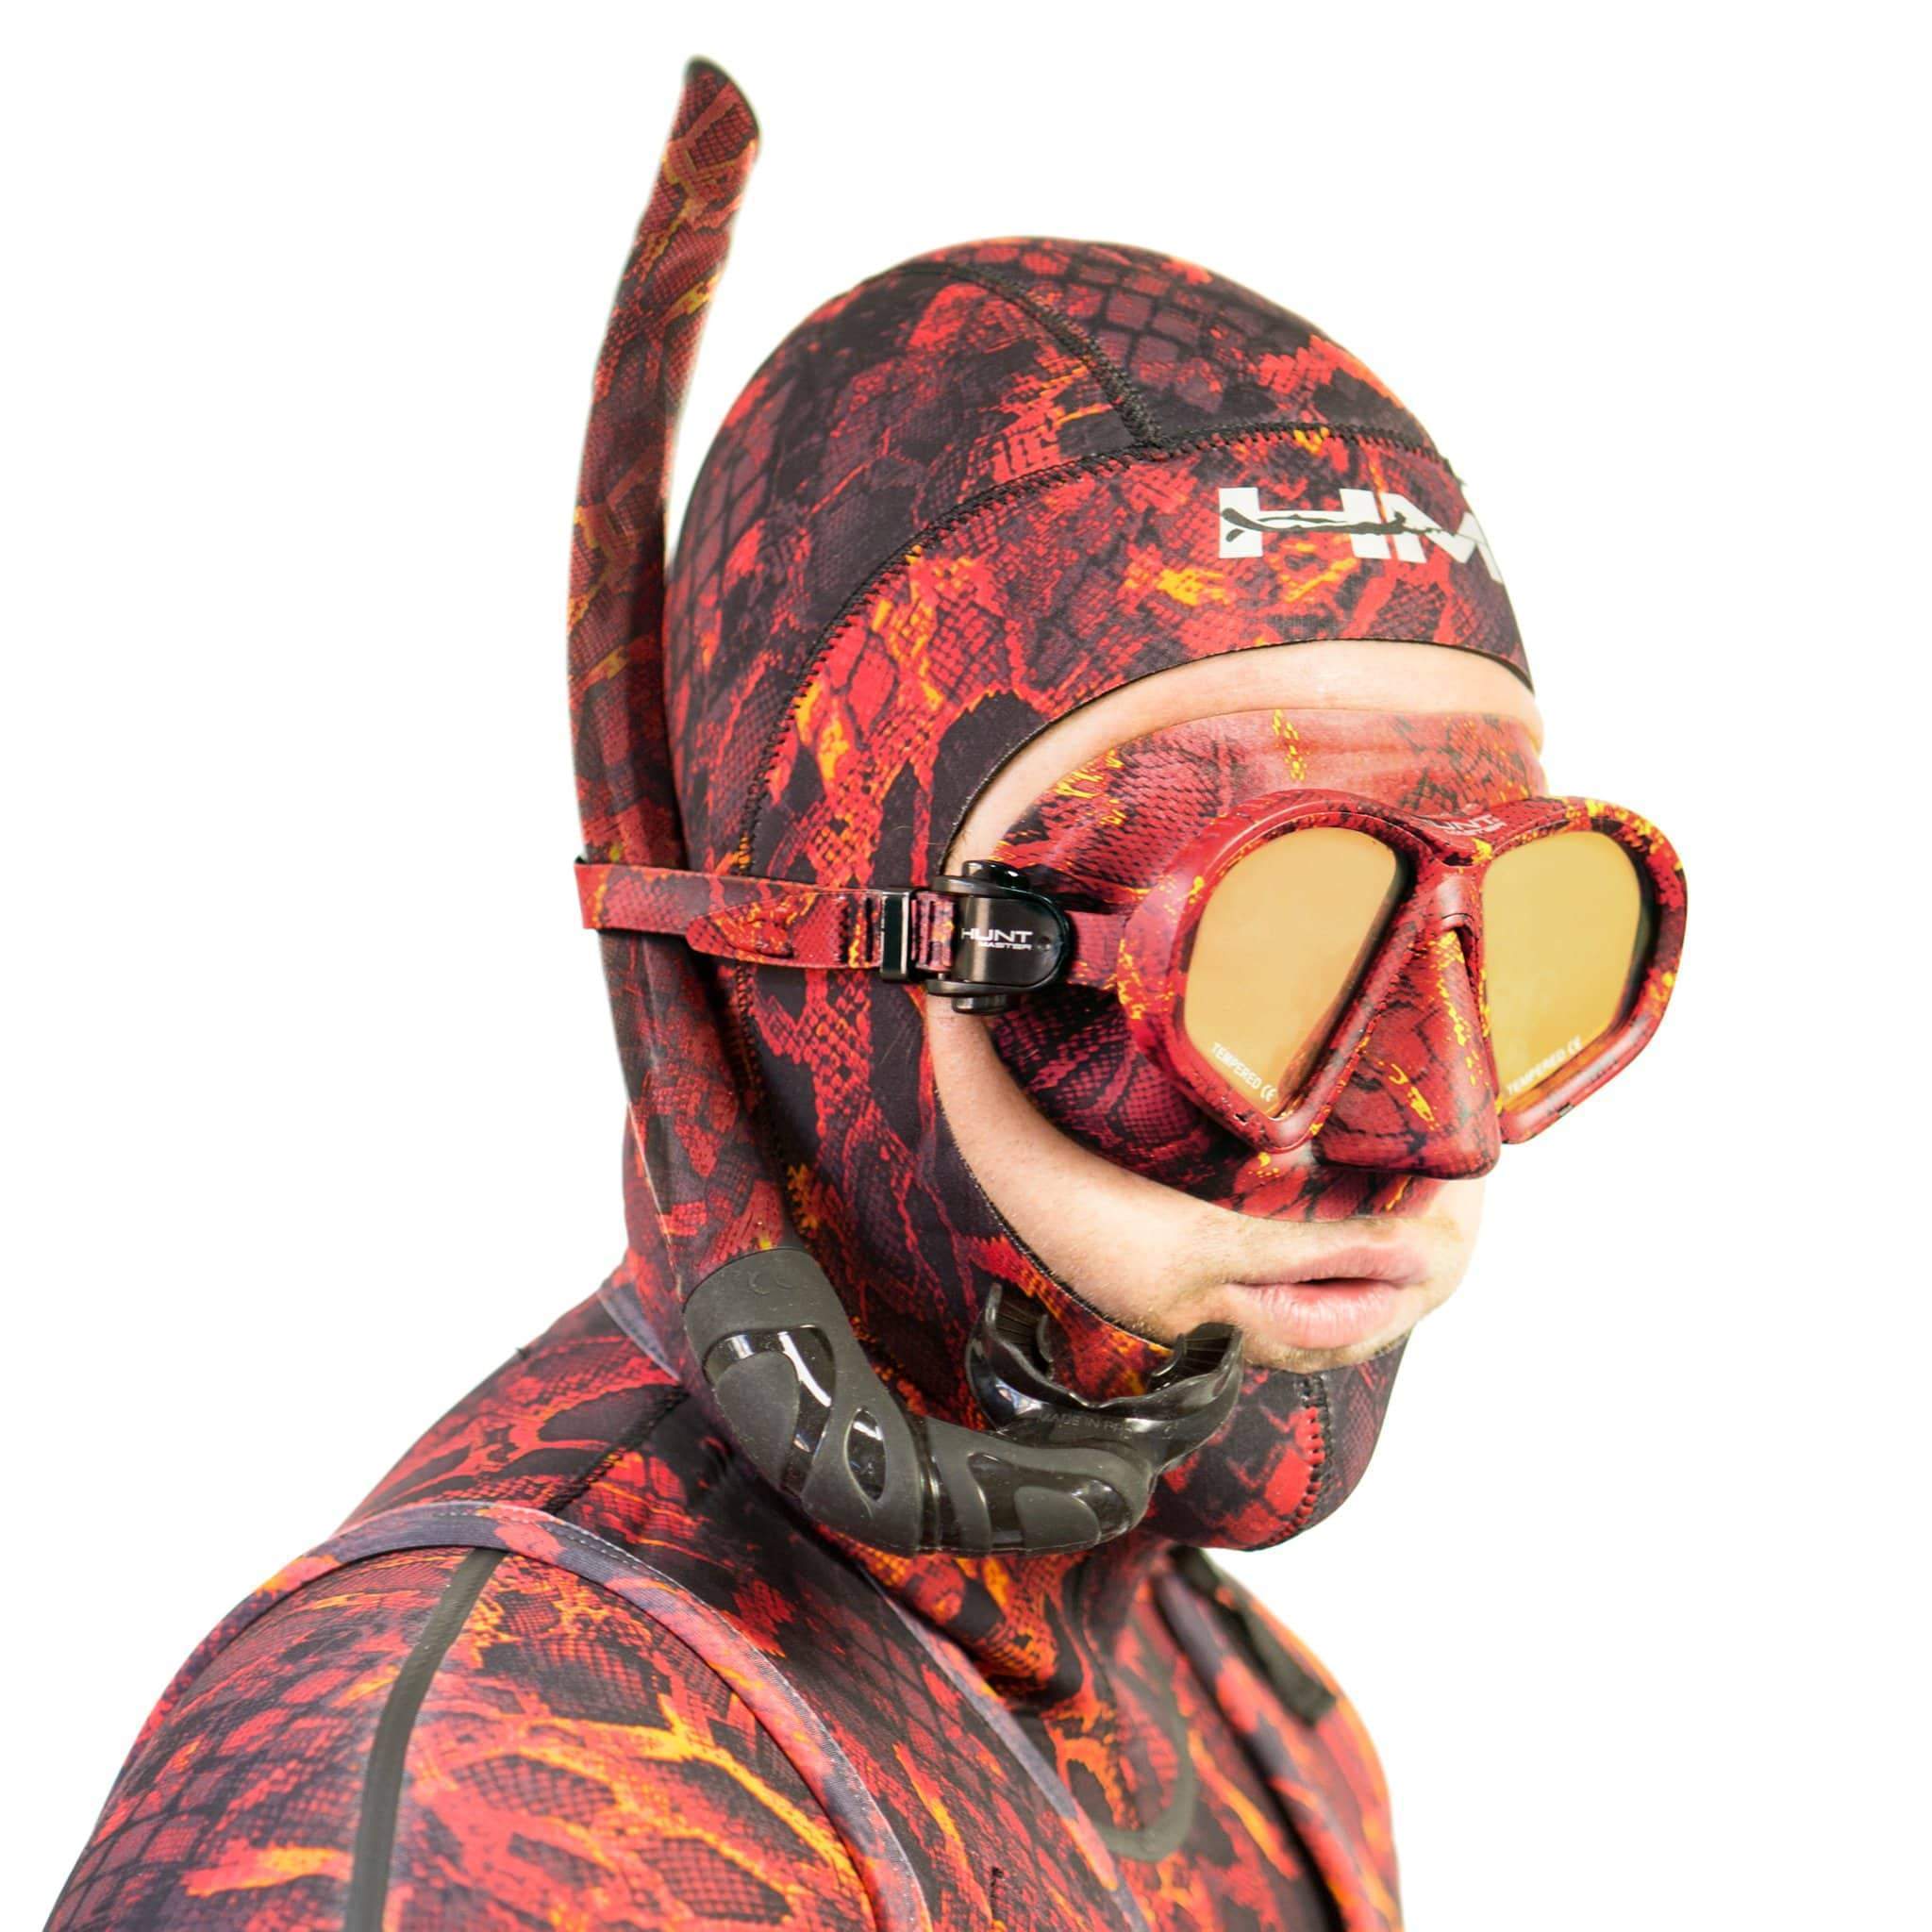 HuntMaster Red Harbinger Camo Diving Mask - With Matching Camo Container (Red)